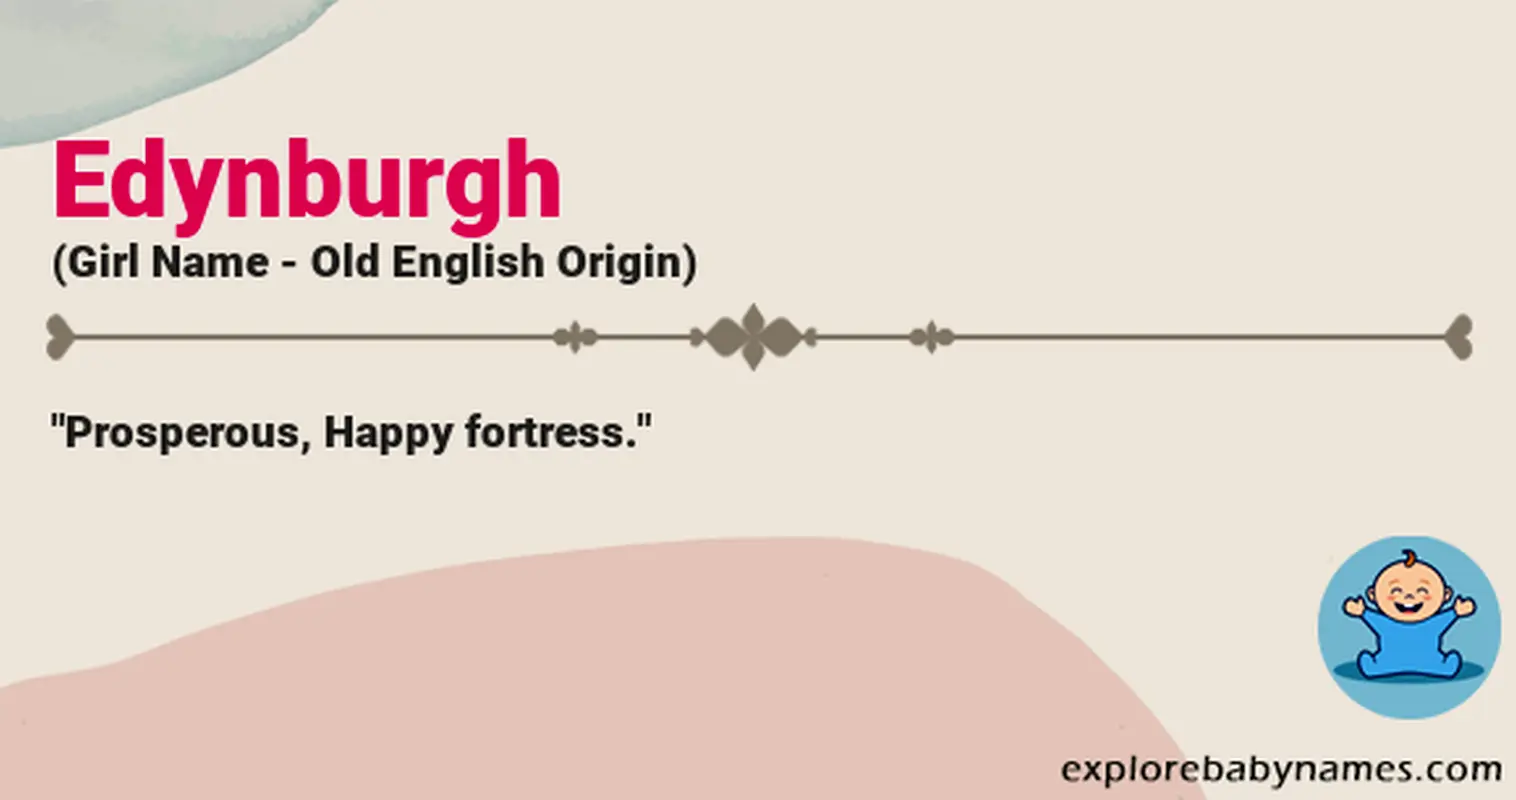 Meaning of Edynburgh